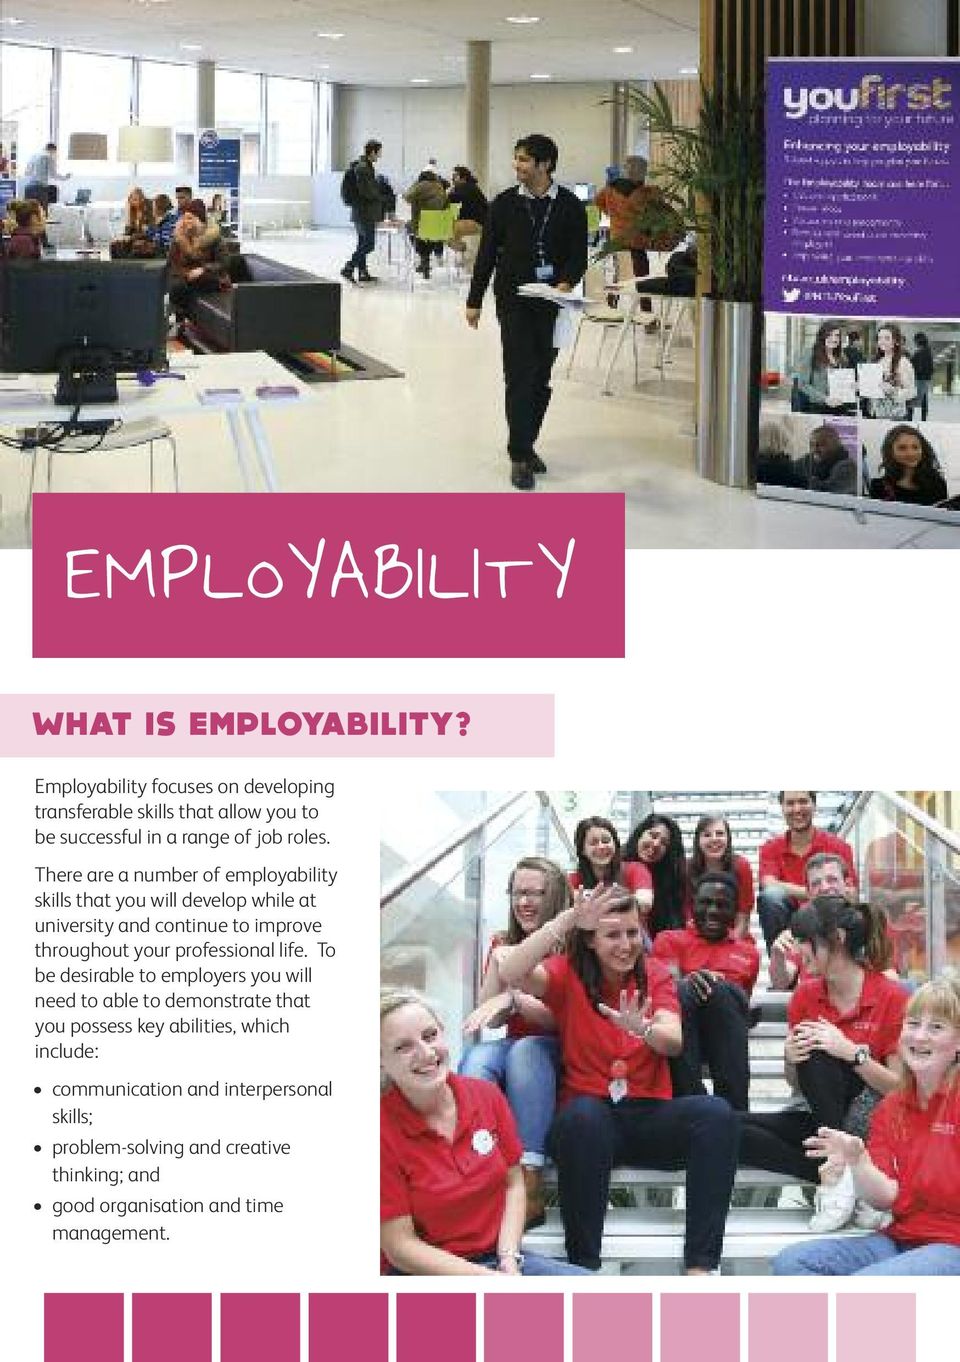 There are a number of employability skills that you will develop while at university and continue to improve throughout your